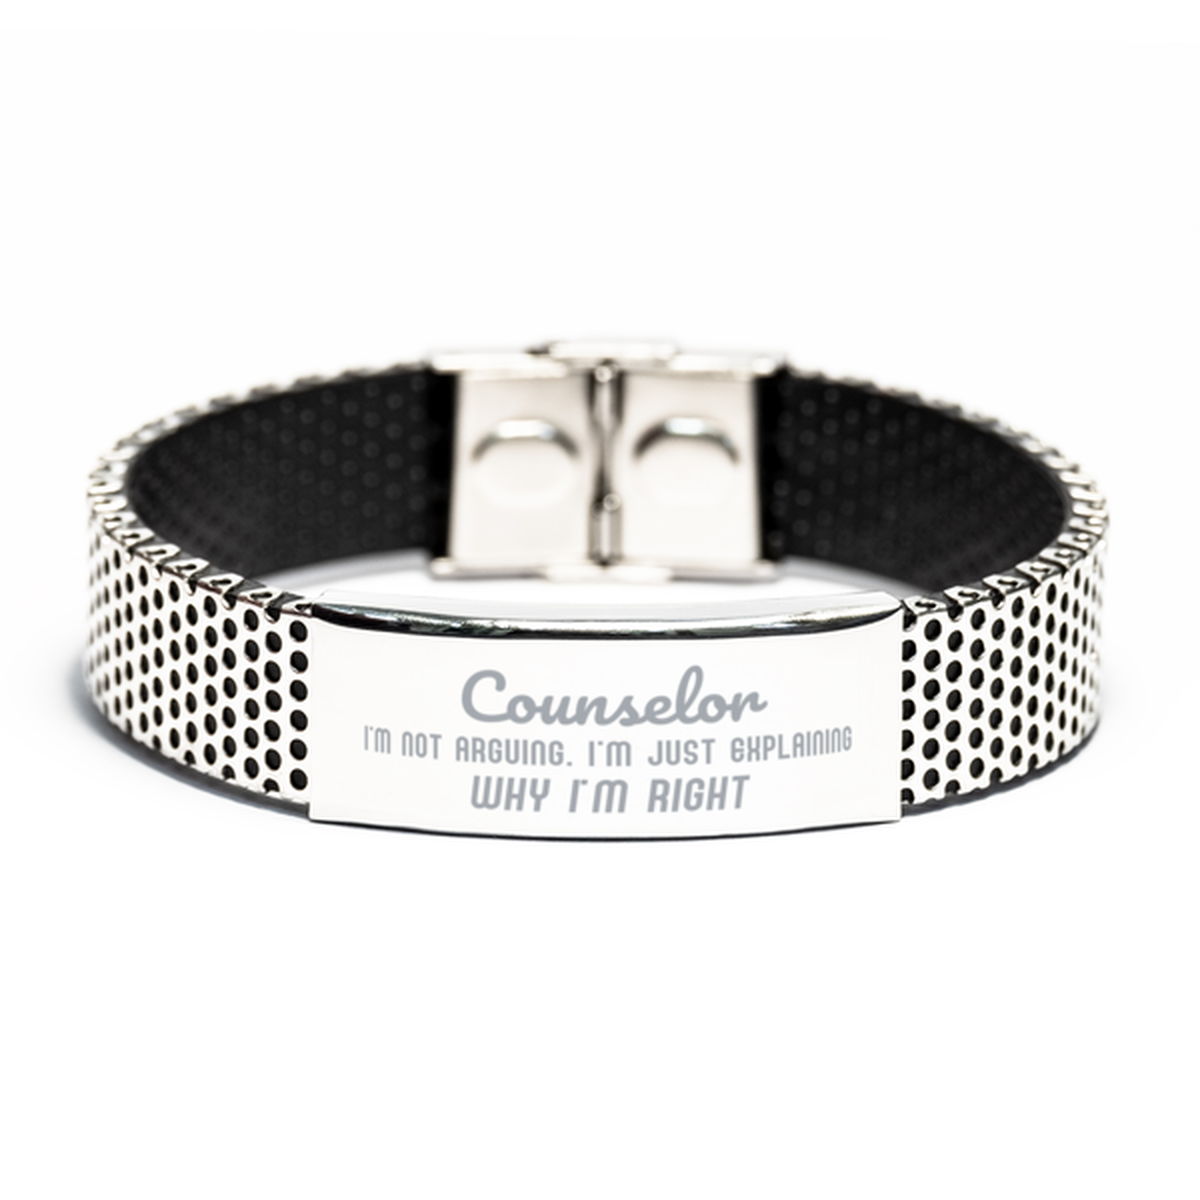 Counselor I'm not Arguing. I'm Just Explaining Why I'm RIGHT Stainless Steel Bracelet, Funny Saying Quote Counselor Gifts For Counselor Graduation Birthday Christmas Gifts for Men Women Coworker